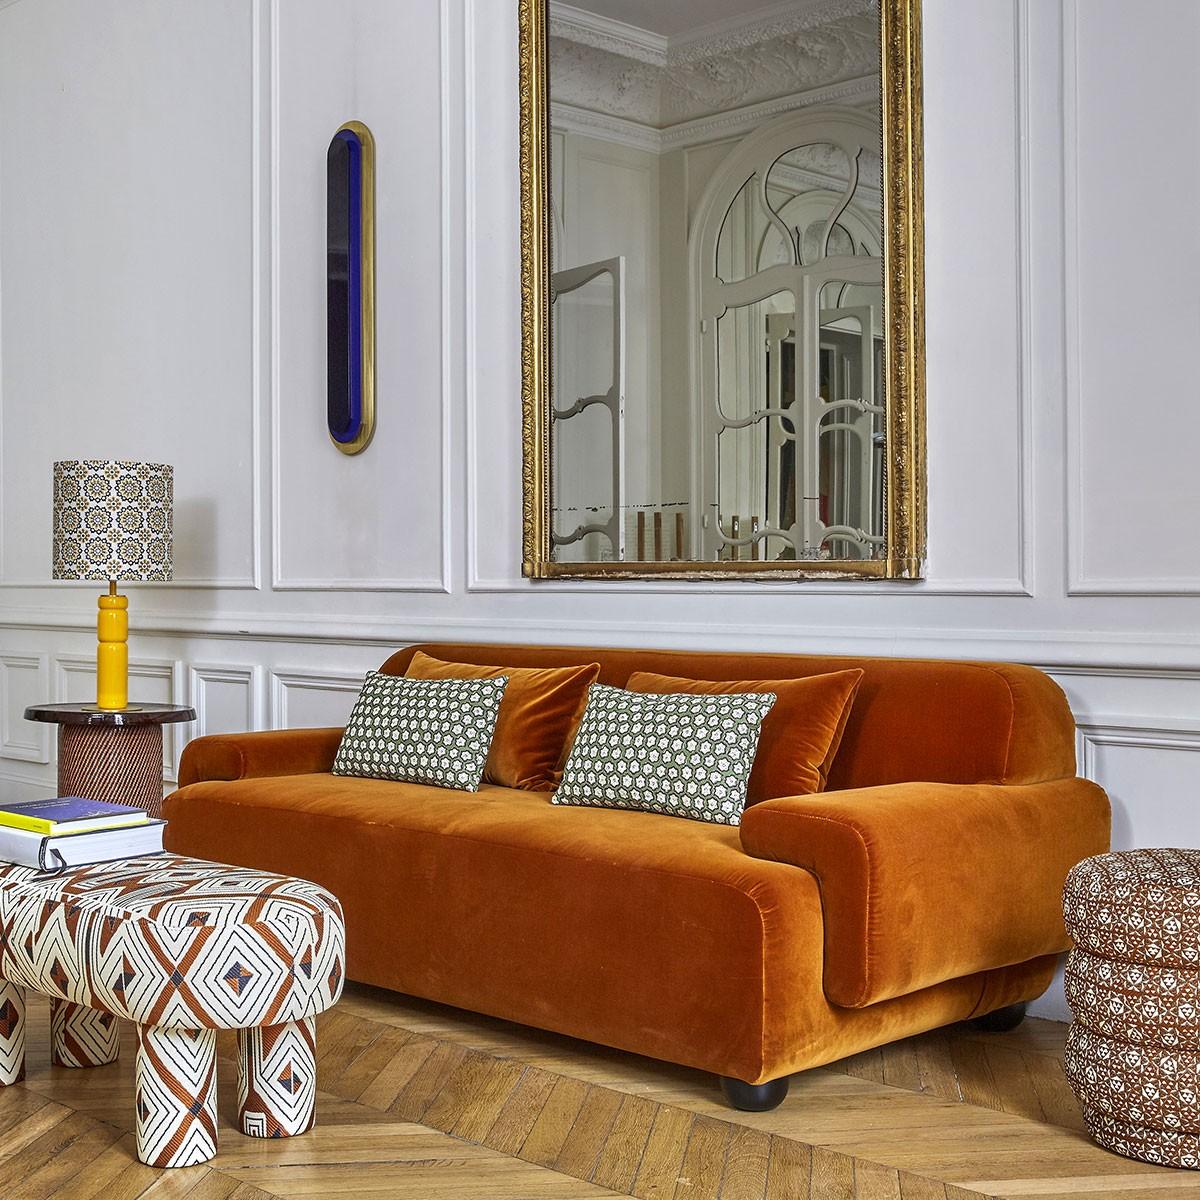 Popus editions lena 2.5 seater sofa in Terracotta London Linen Fabric

It looks like it's straight out of a movie, with its generous curves and wide armrests. It is a real invitation to spend long Sundays with the family, comfortably seated in